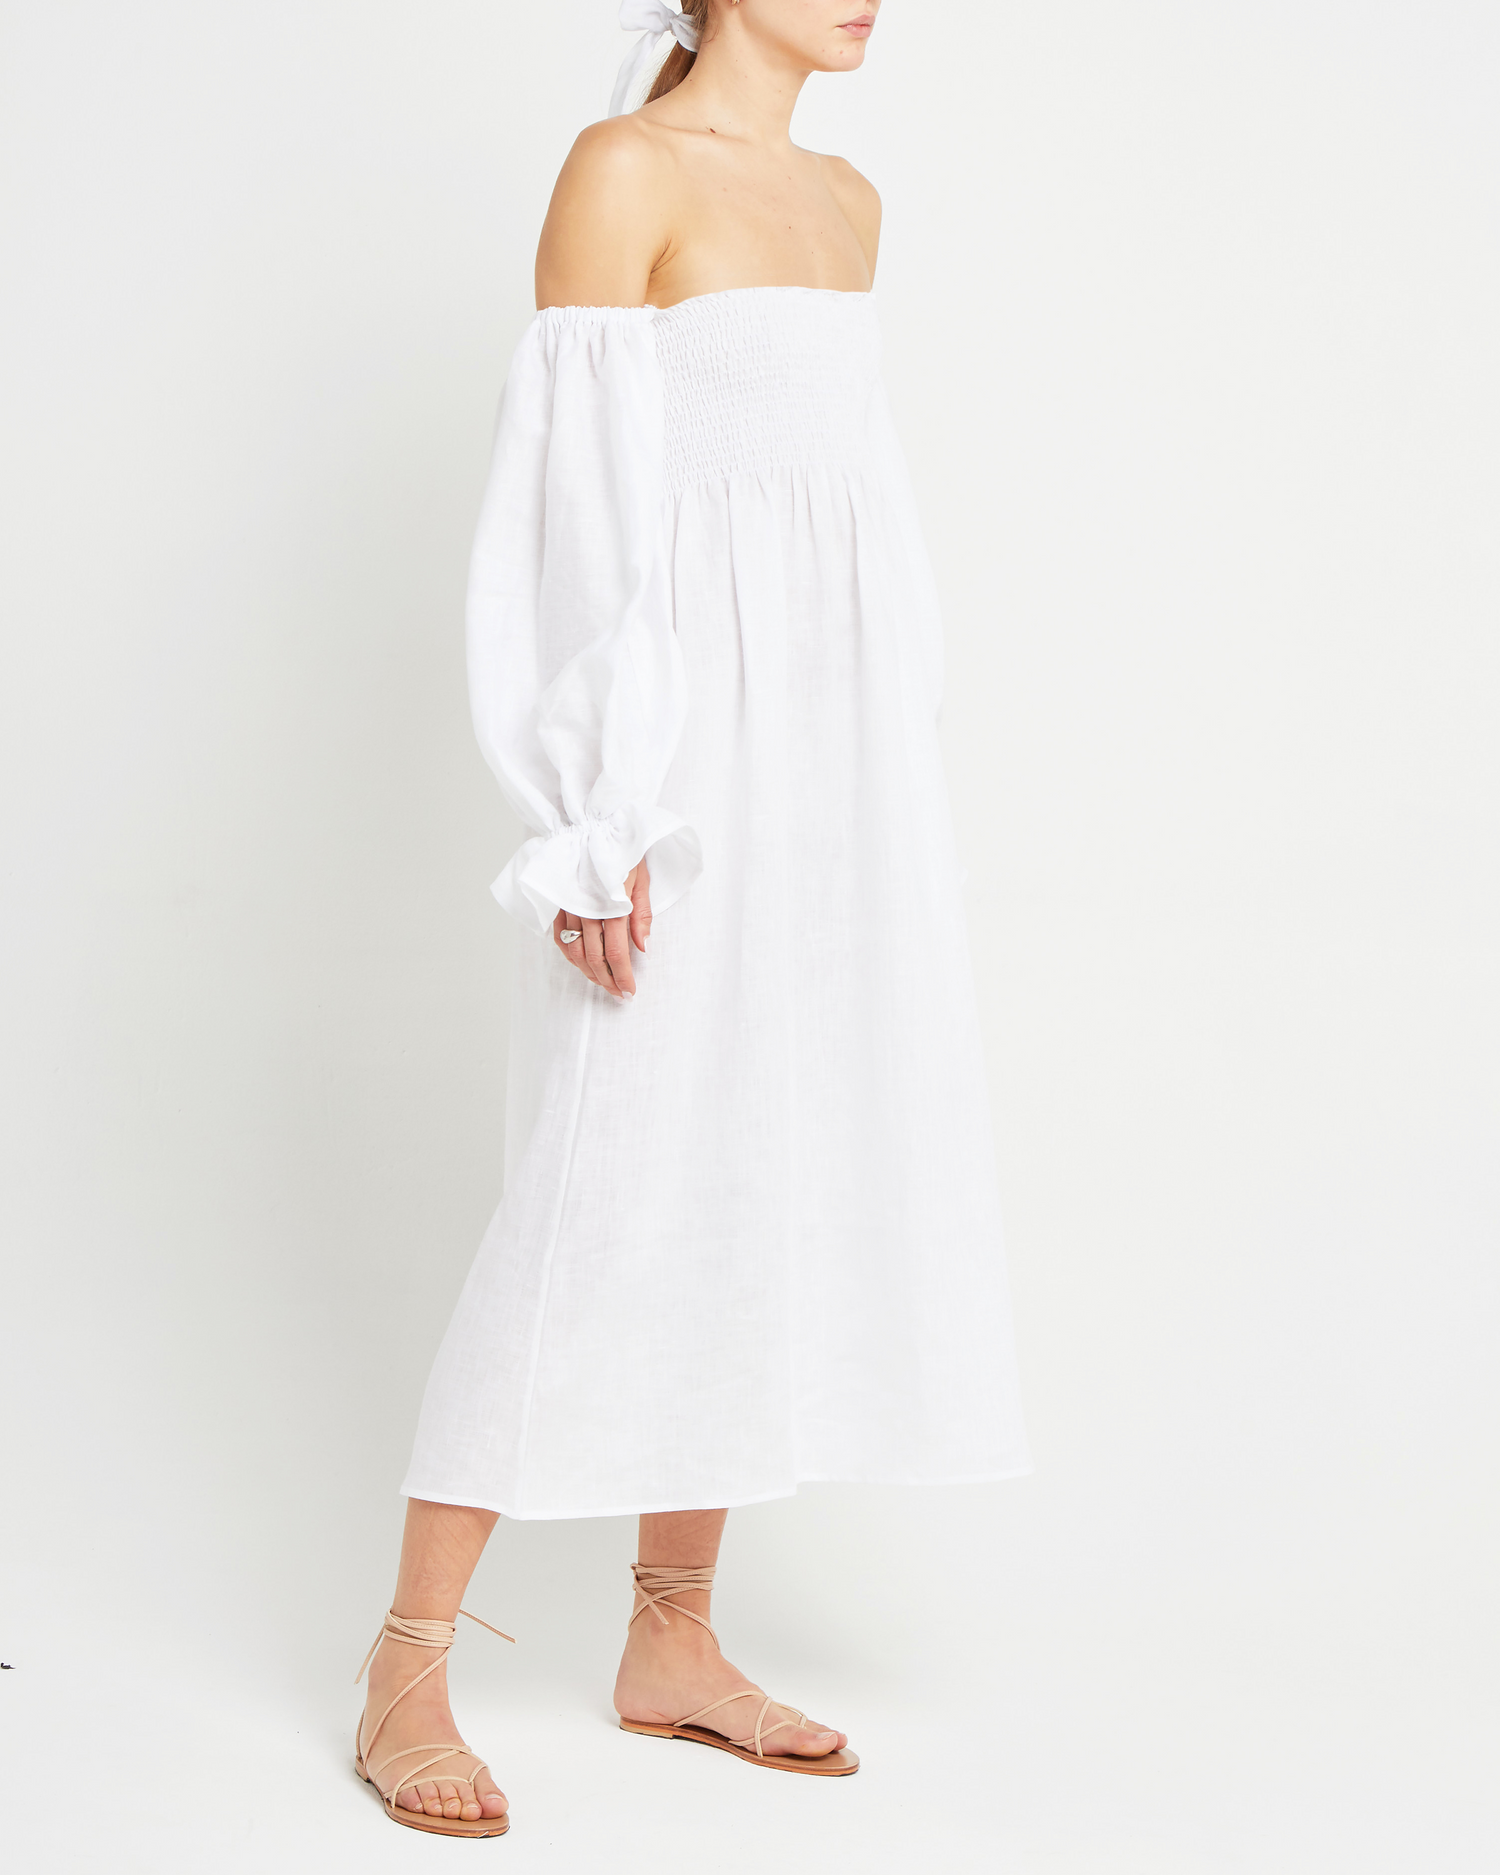 Third image of Athena Dress, a white midi dress, off shoulder, long sleeve, puff sleeves, smocked